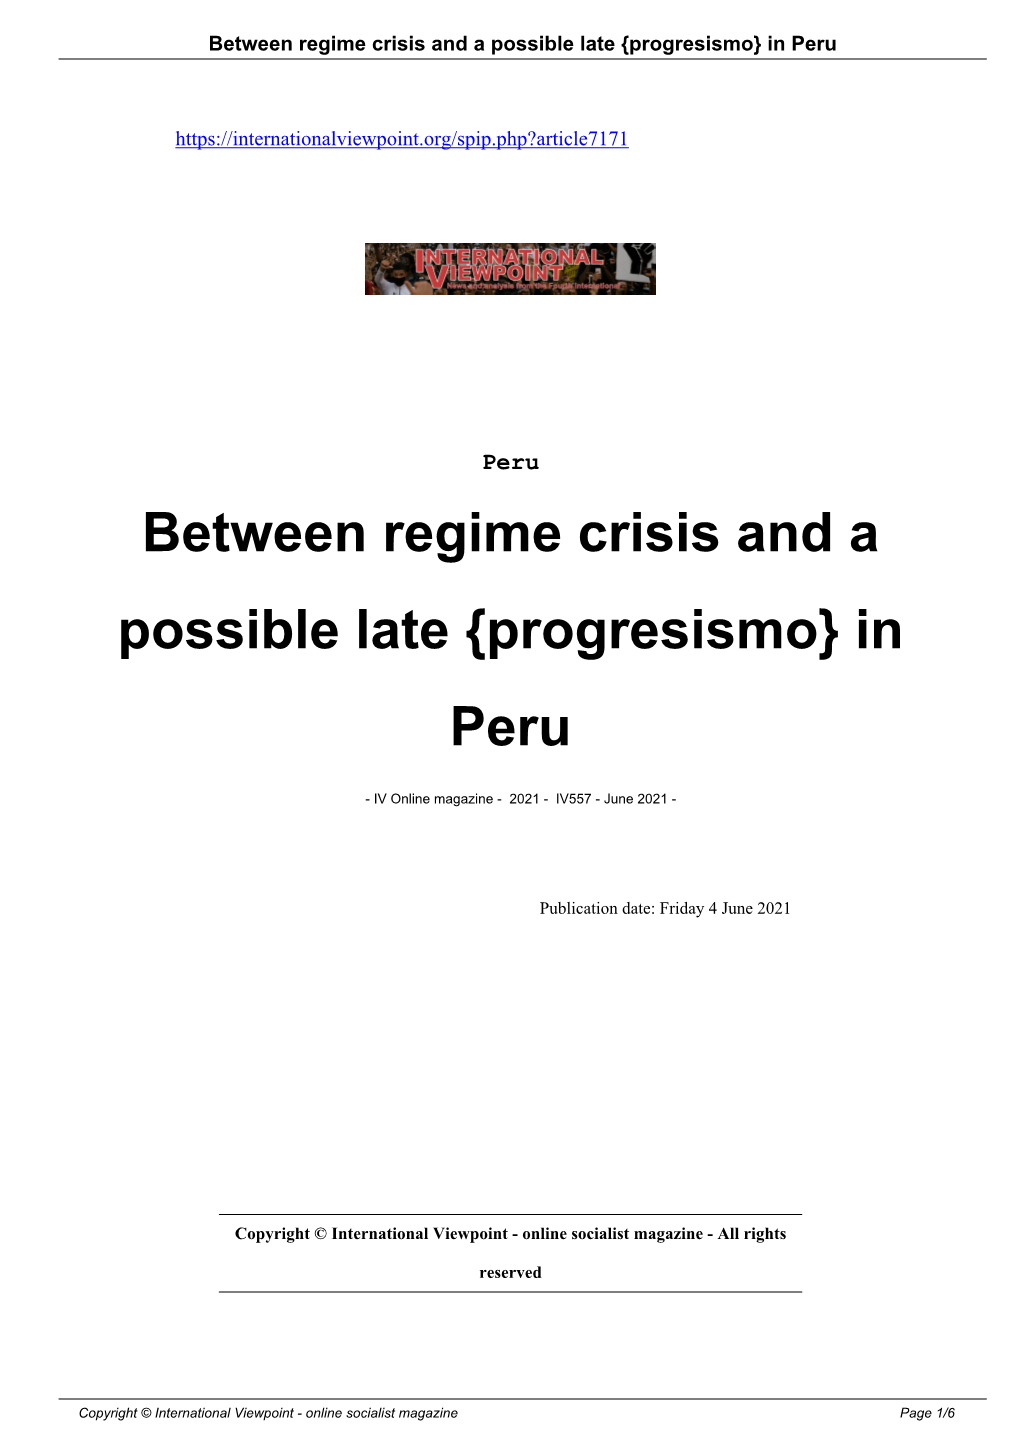 Between Regime Crisis and a Possible Late {Progresismo} in Peru